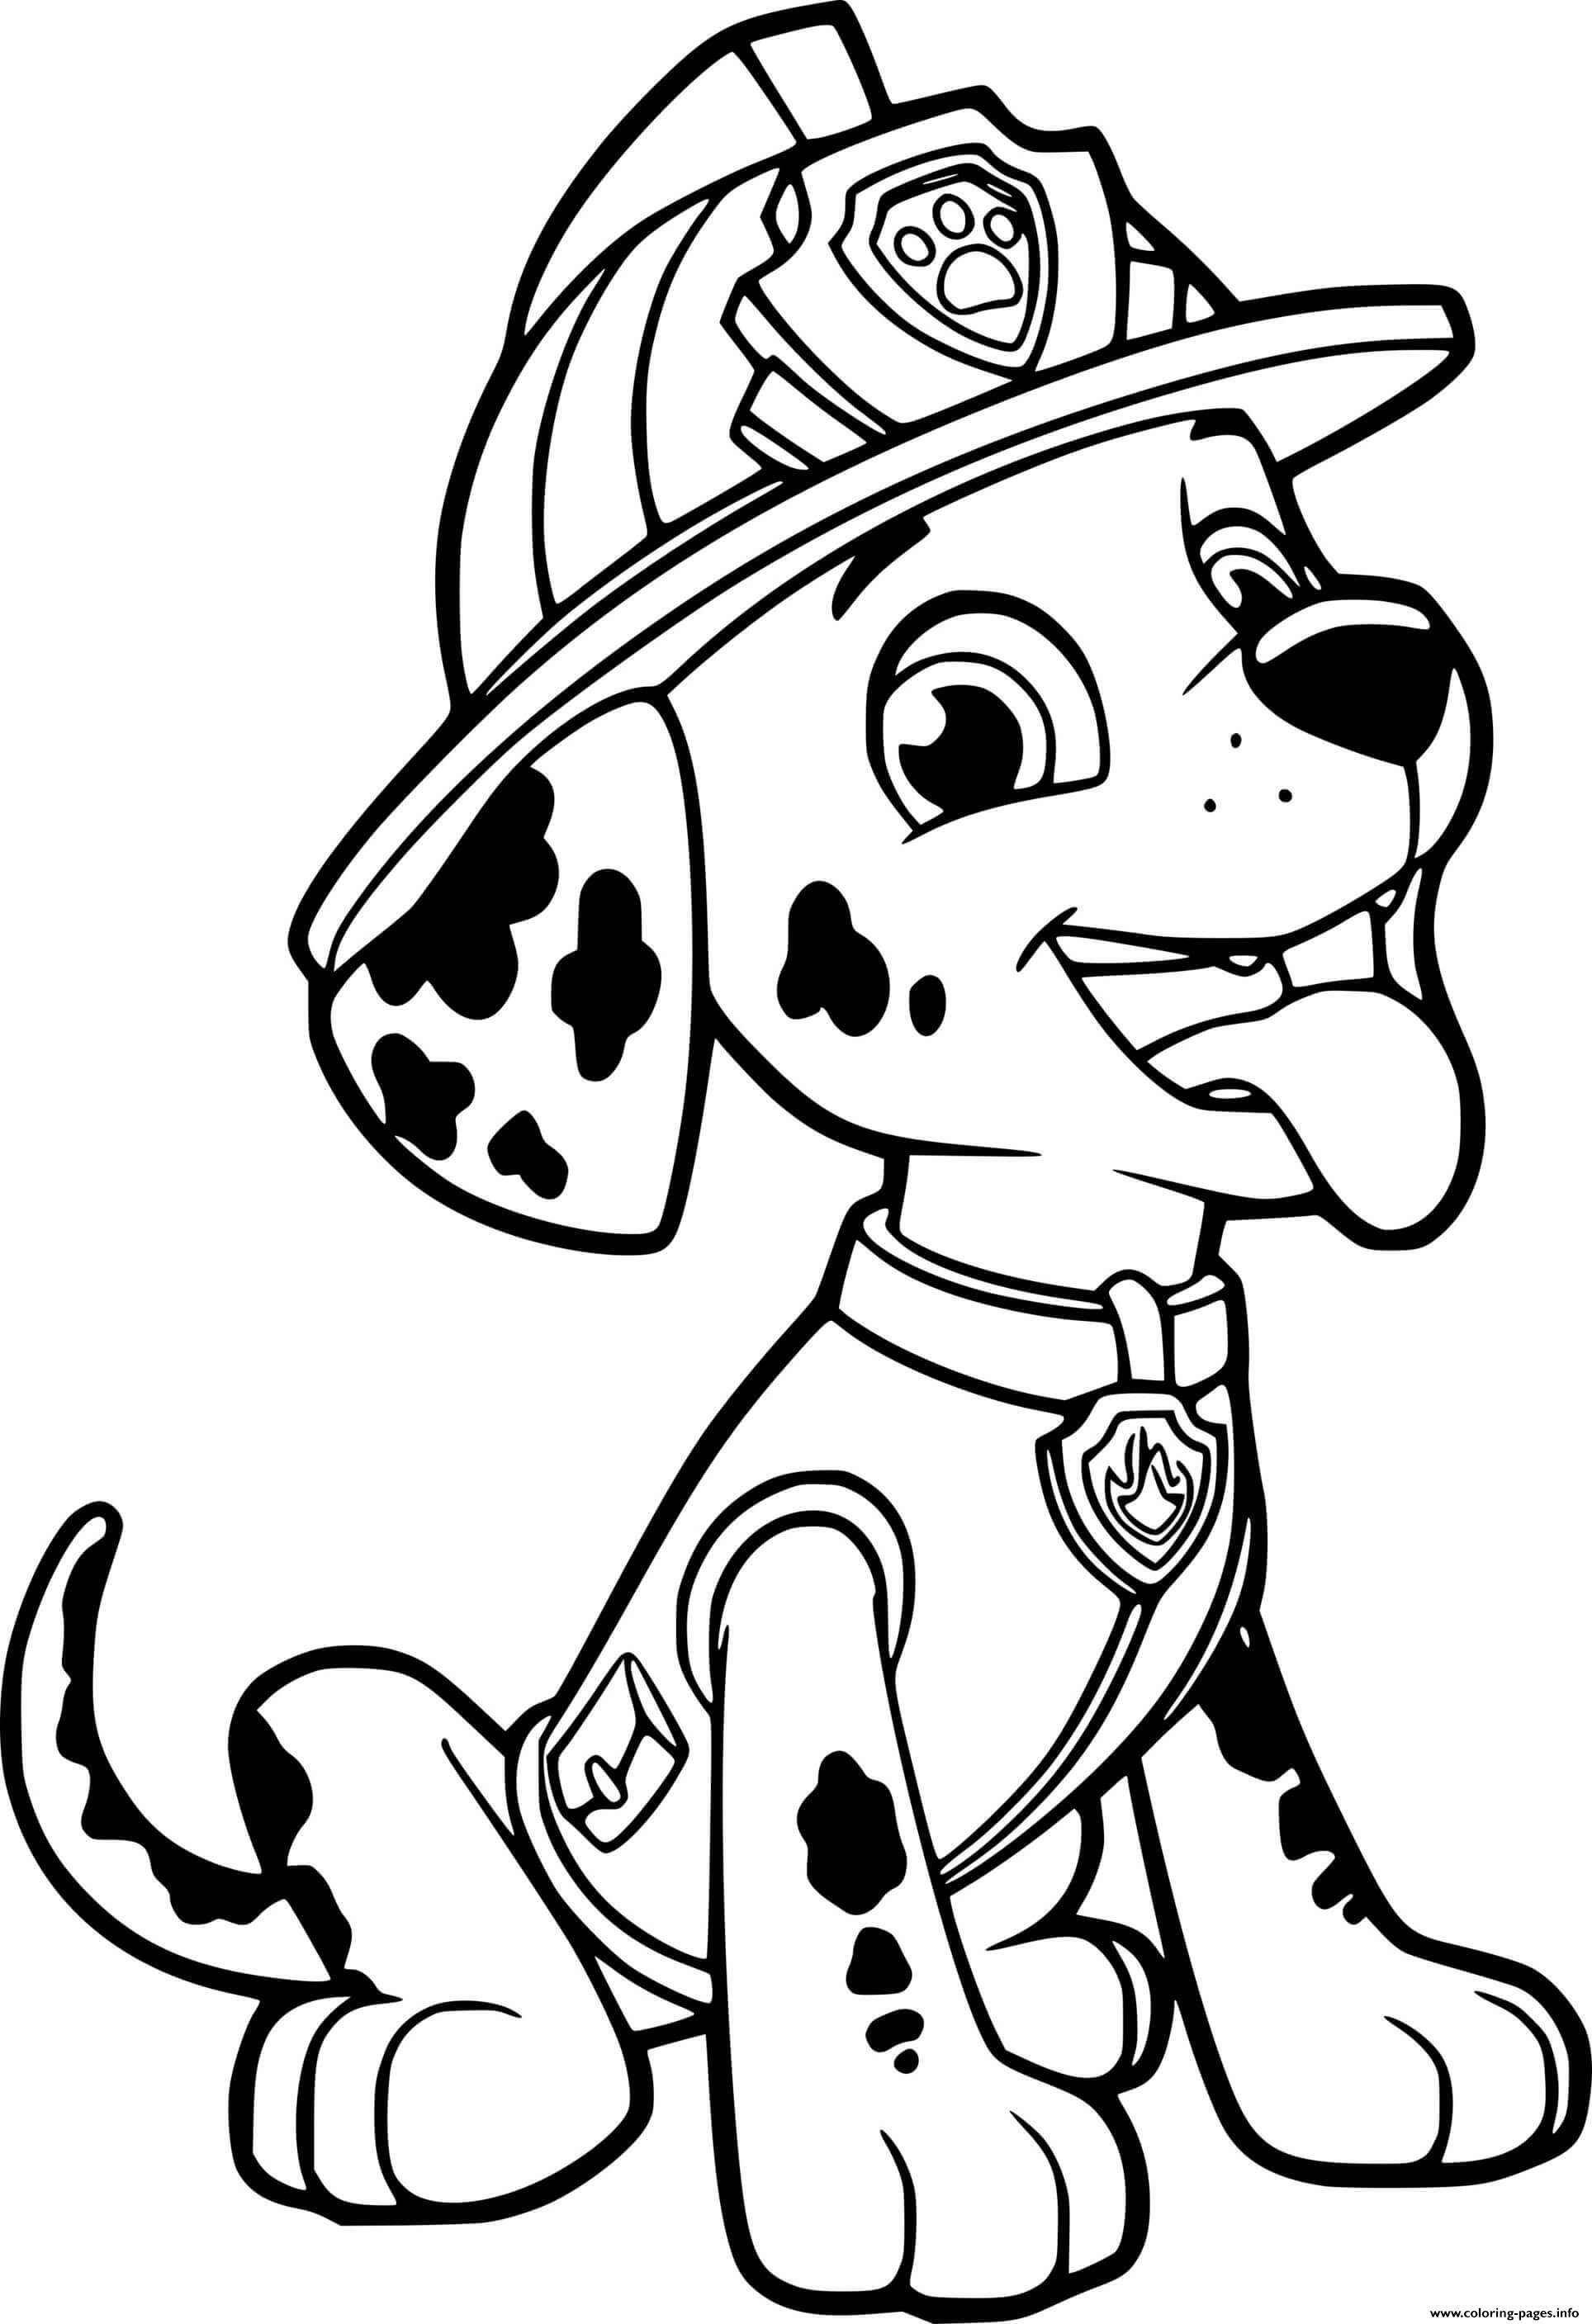 Paw Patrol Coloring Pages FREE Printable 76